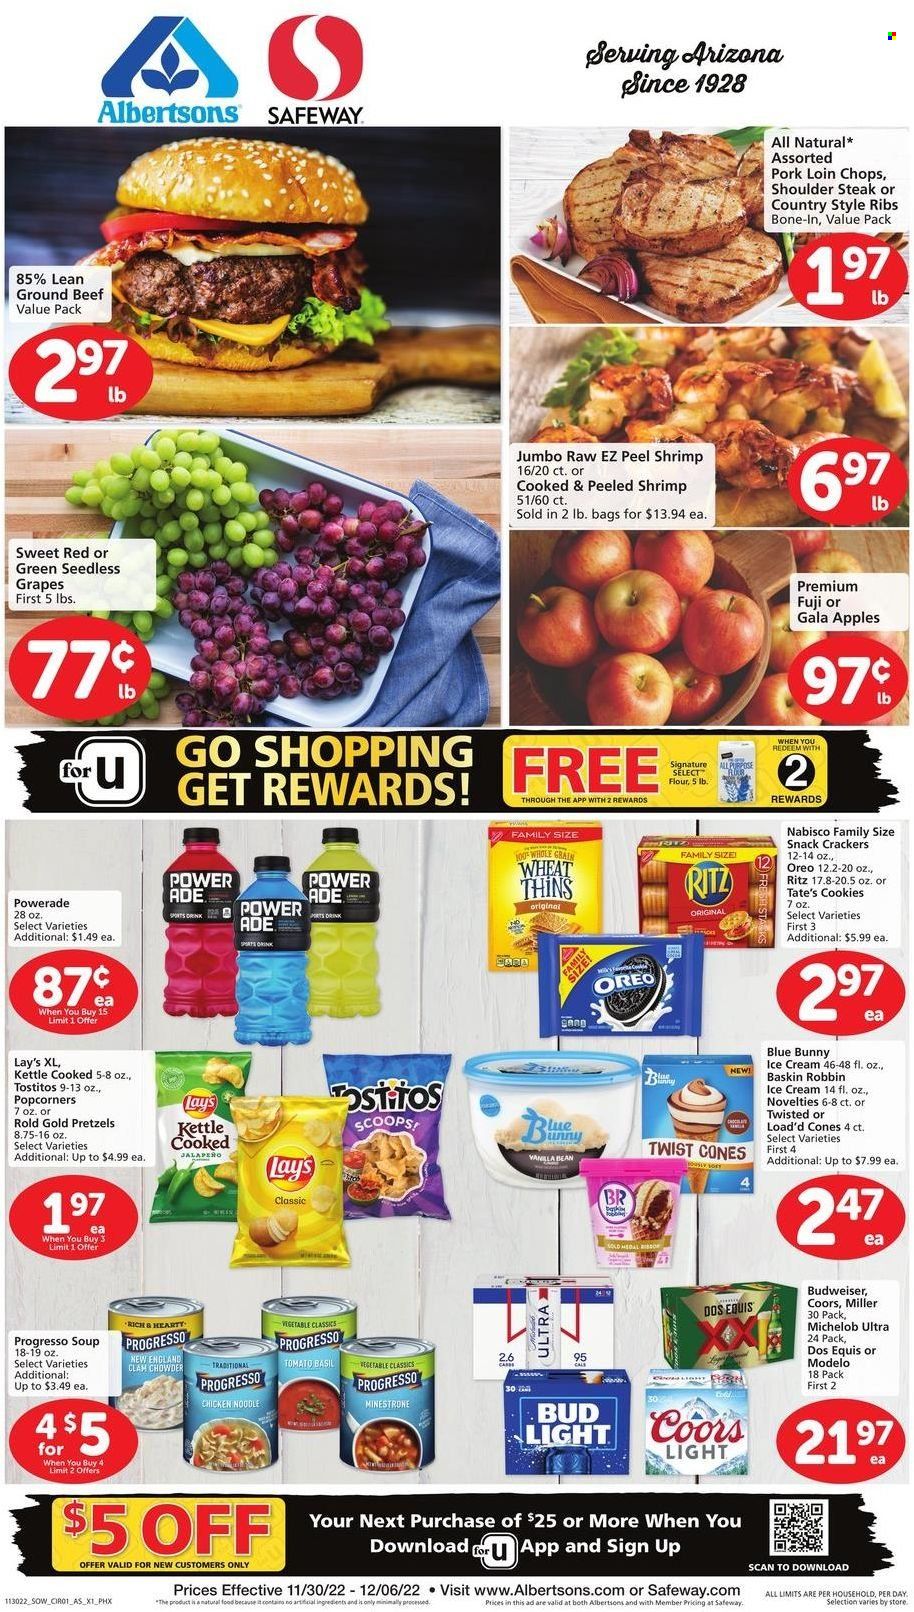 thumbnail - Safeway Flyer - 11/30/2022 - 12/06/2022 - Sales products - pretzels, apples, Gala, grapes, seedless grapes, beef meat, ground beef, steak, pork chops, pork loin, pork meat, pork ribs, country style ribs, noodles, Progresso, Oreo, Blue Bunny, cookies, snack, crackers, RITZ, Lay’s, Thins, popcorn, Tostitos, flour, clam chowder, Powerade, AriZona, beer, Bud Light, Miller, Modelo, Budweiser, Coors, Dos Equis, Michelob. Page 1.